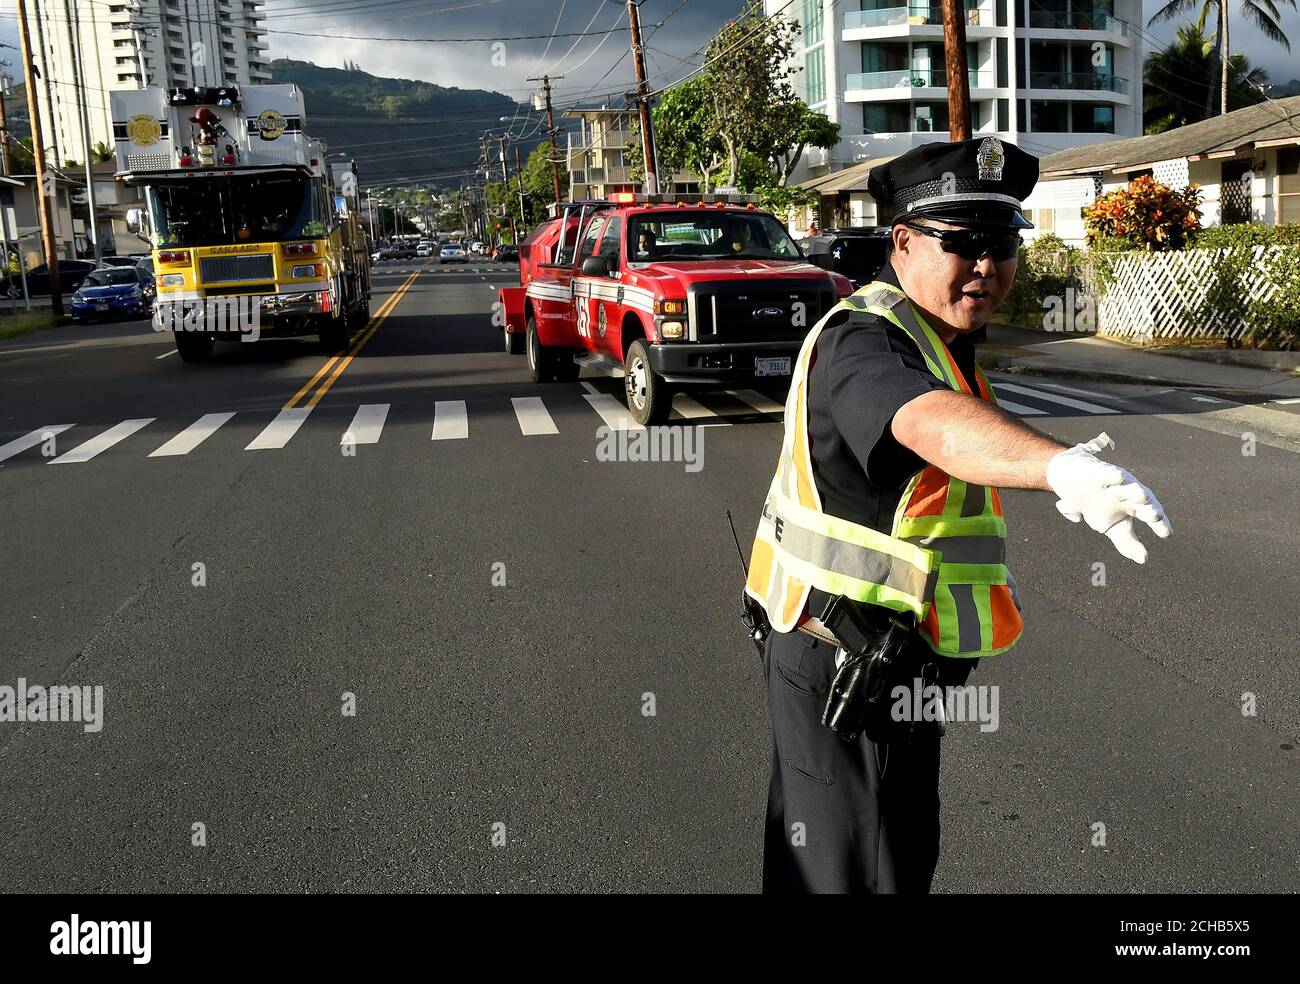 A police officer directs a fire truck to the Marco Polo apartment building  after a fire broke out in it in Honolulu, Hawaii, July 14, 2017.  REUTERS/Hugh Gentry Stock Photo - Alamy